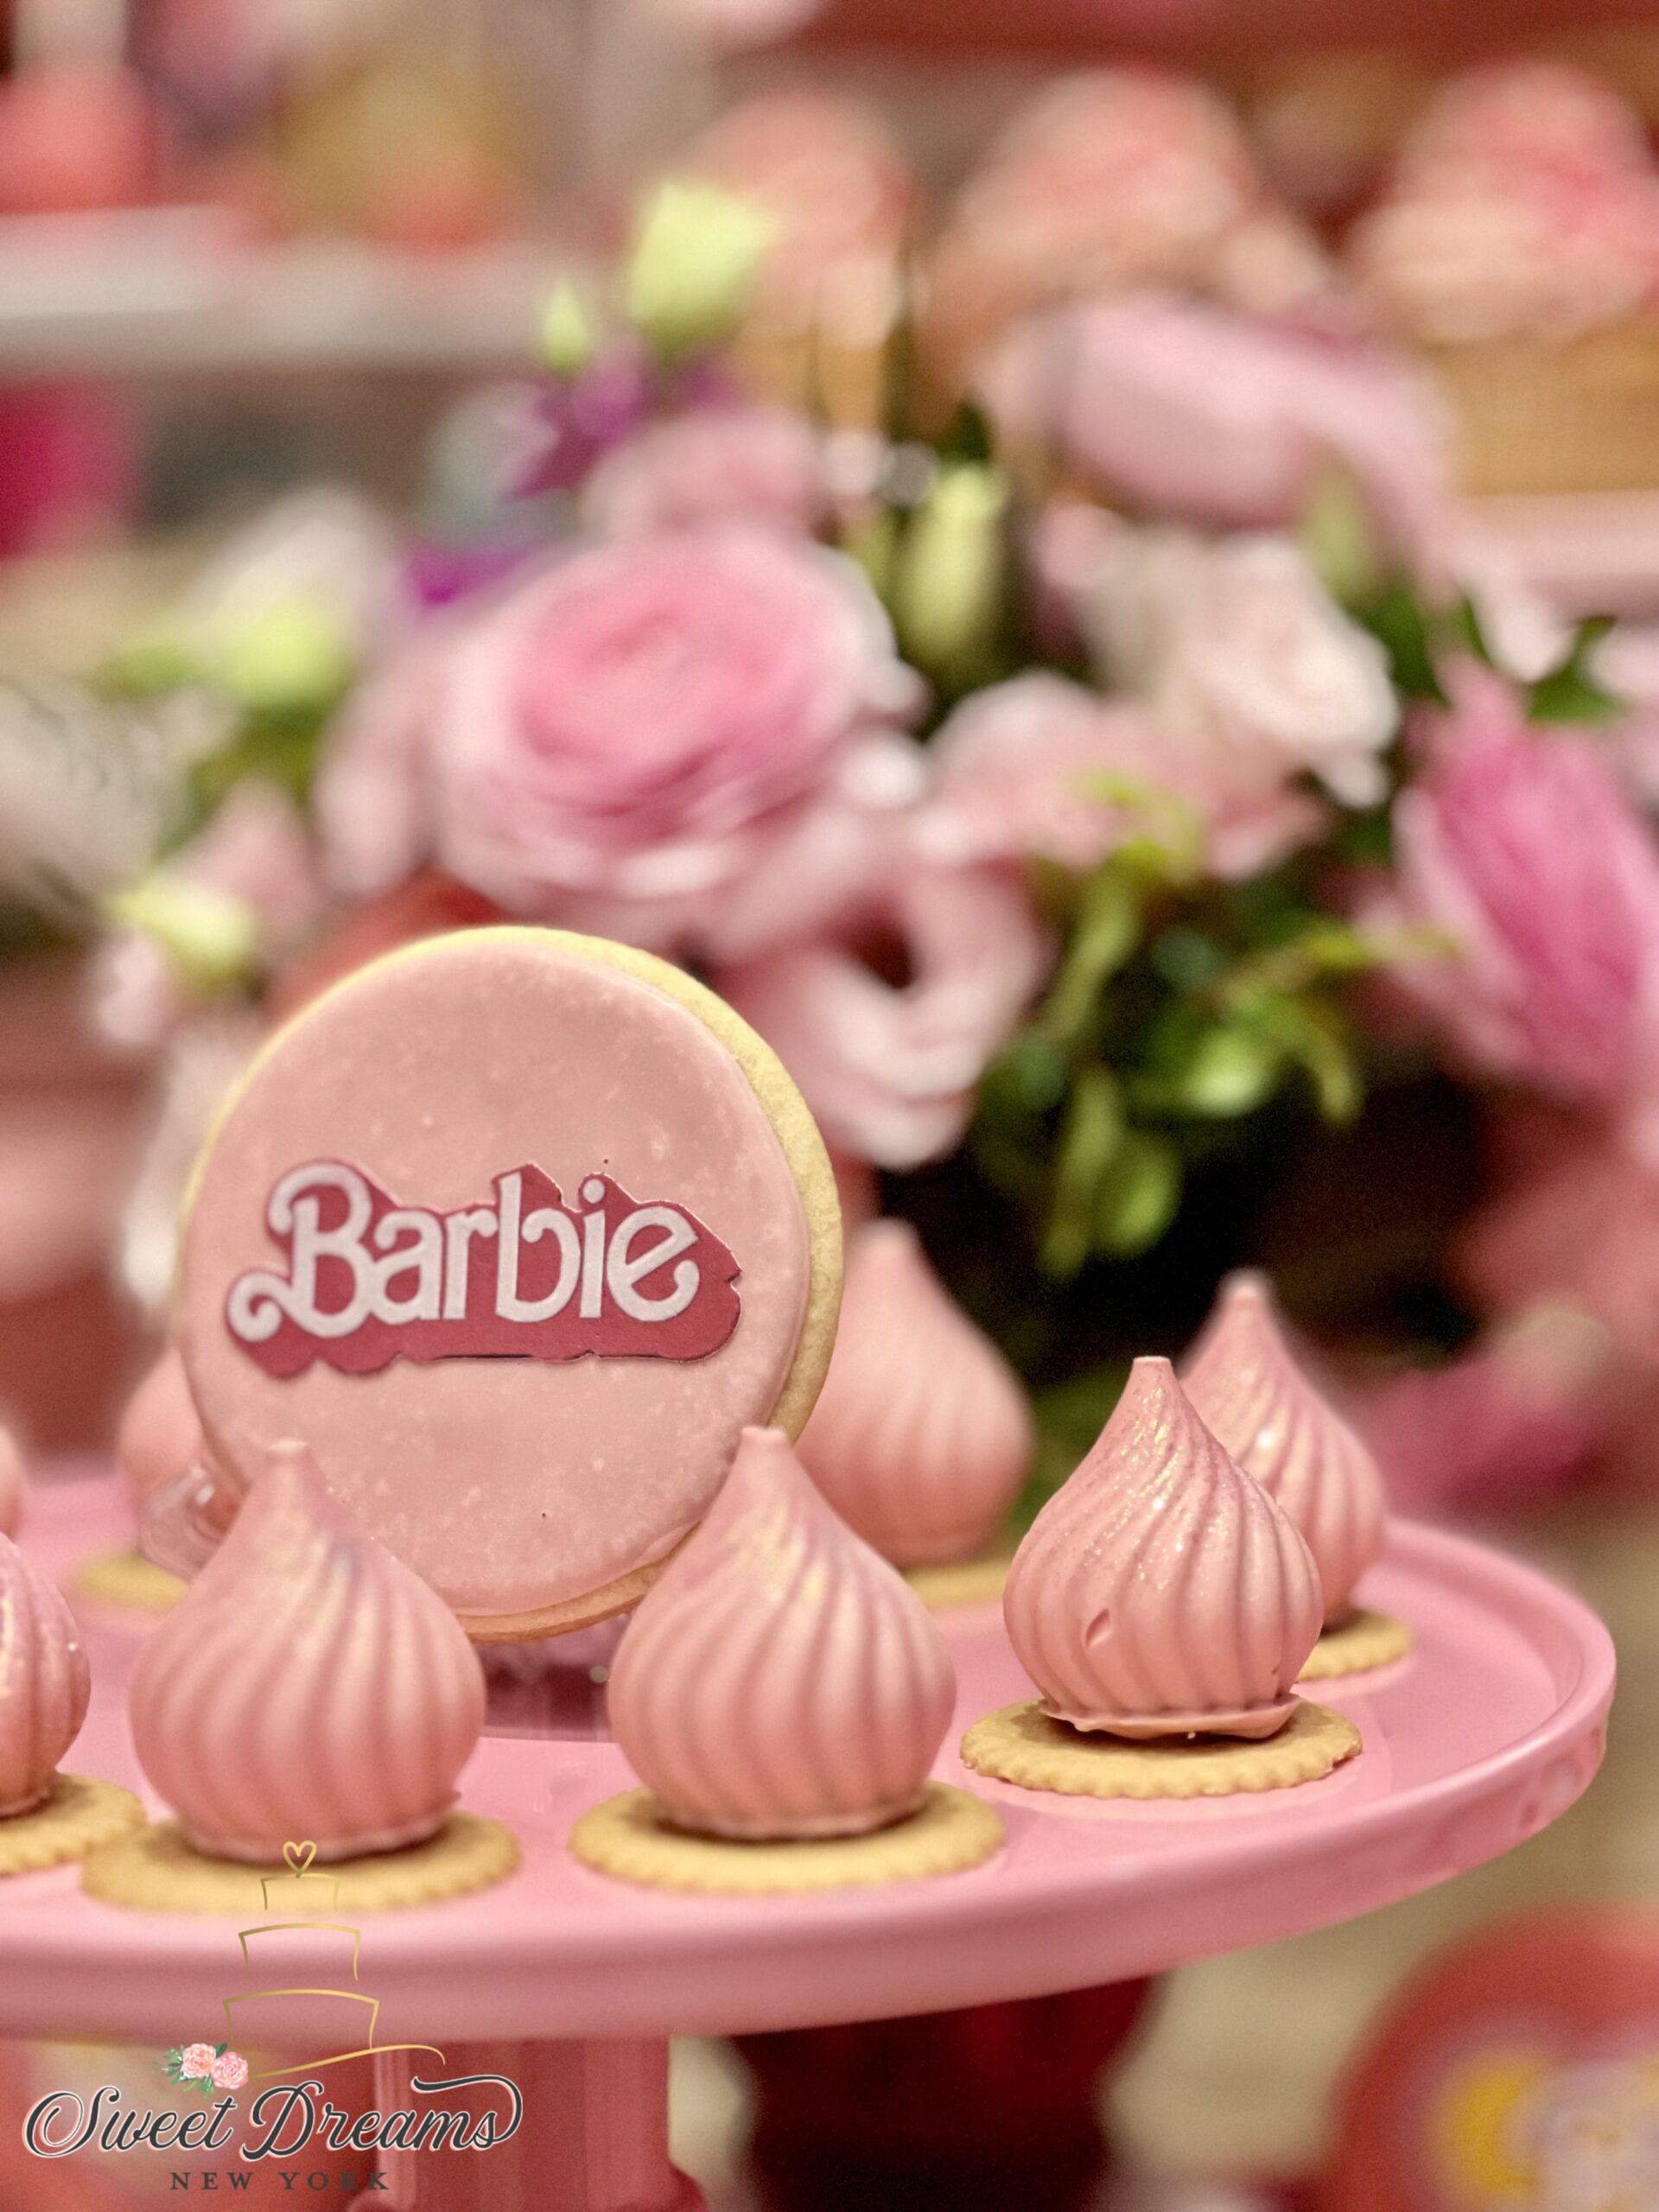 Barbie The Movie Dessert Table NYC Premiere Pink Cupcakes Barbie birthday party Bridal Shower pink Desserts